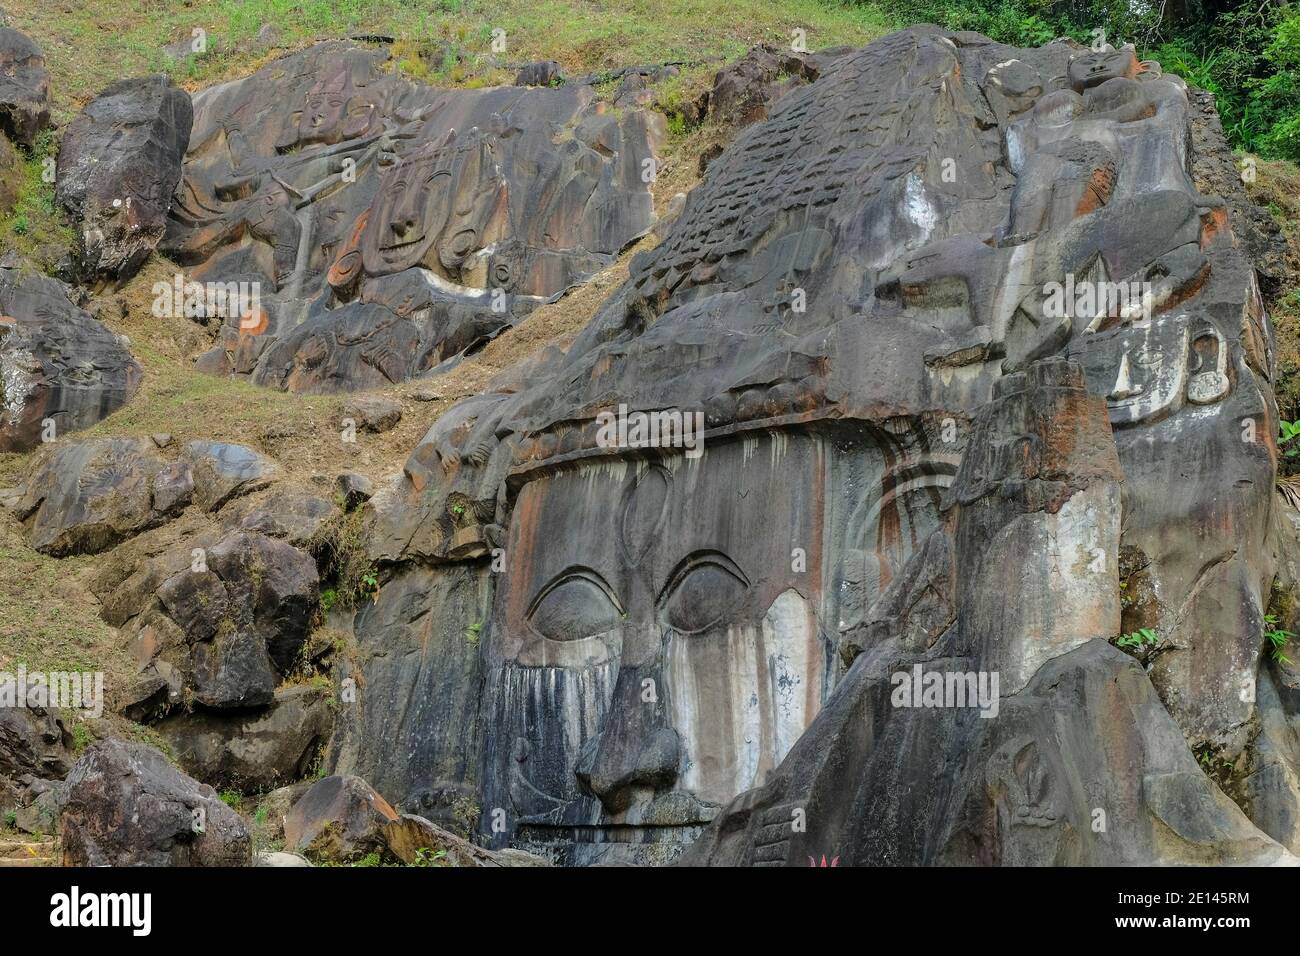 Sculptures carved into the rock at the archaeological site of Unakoti in the state of Tripura. India. Stock Photo